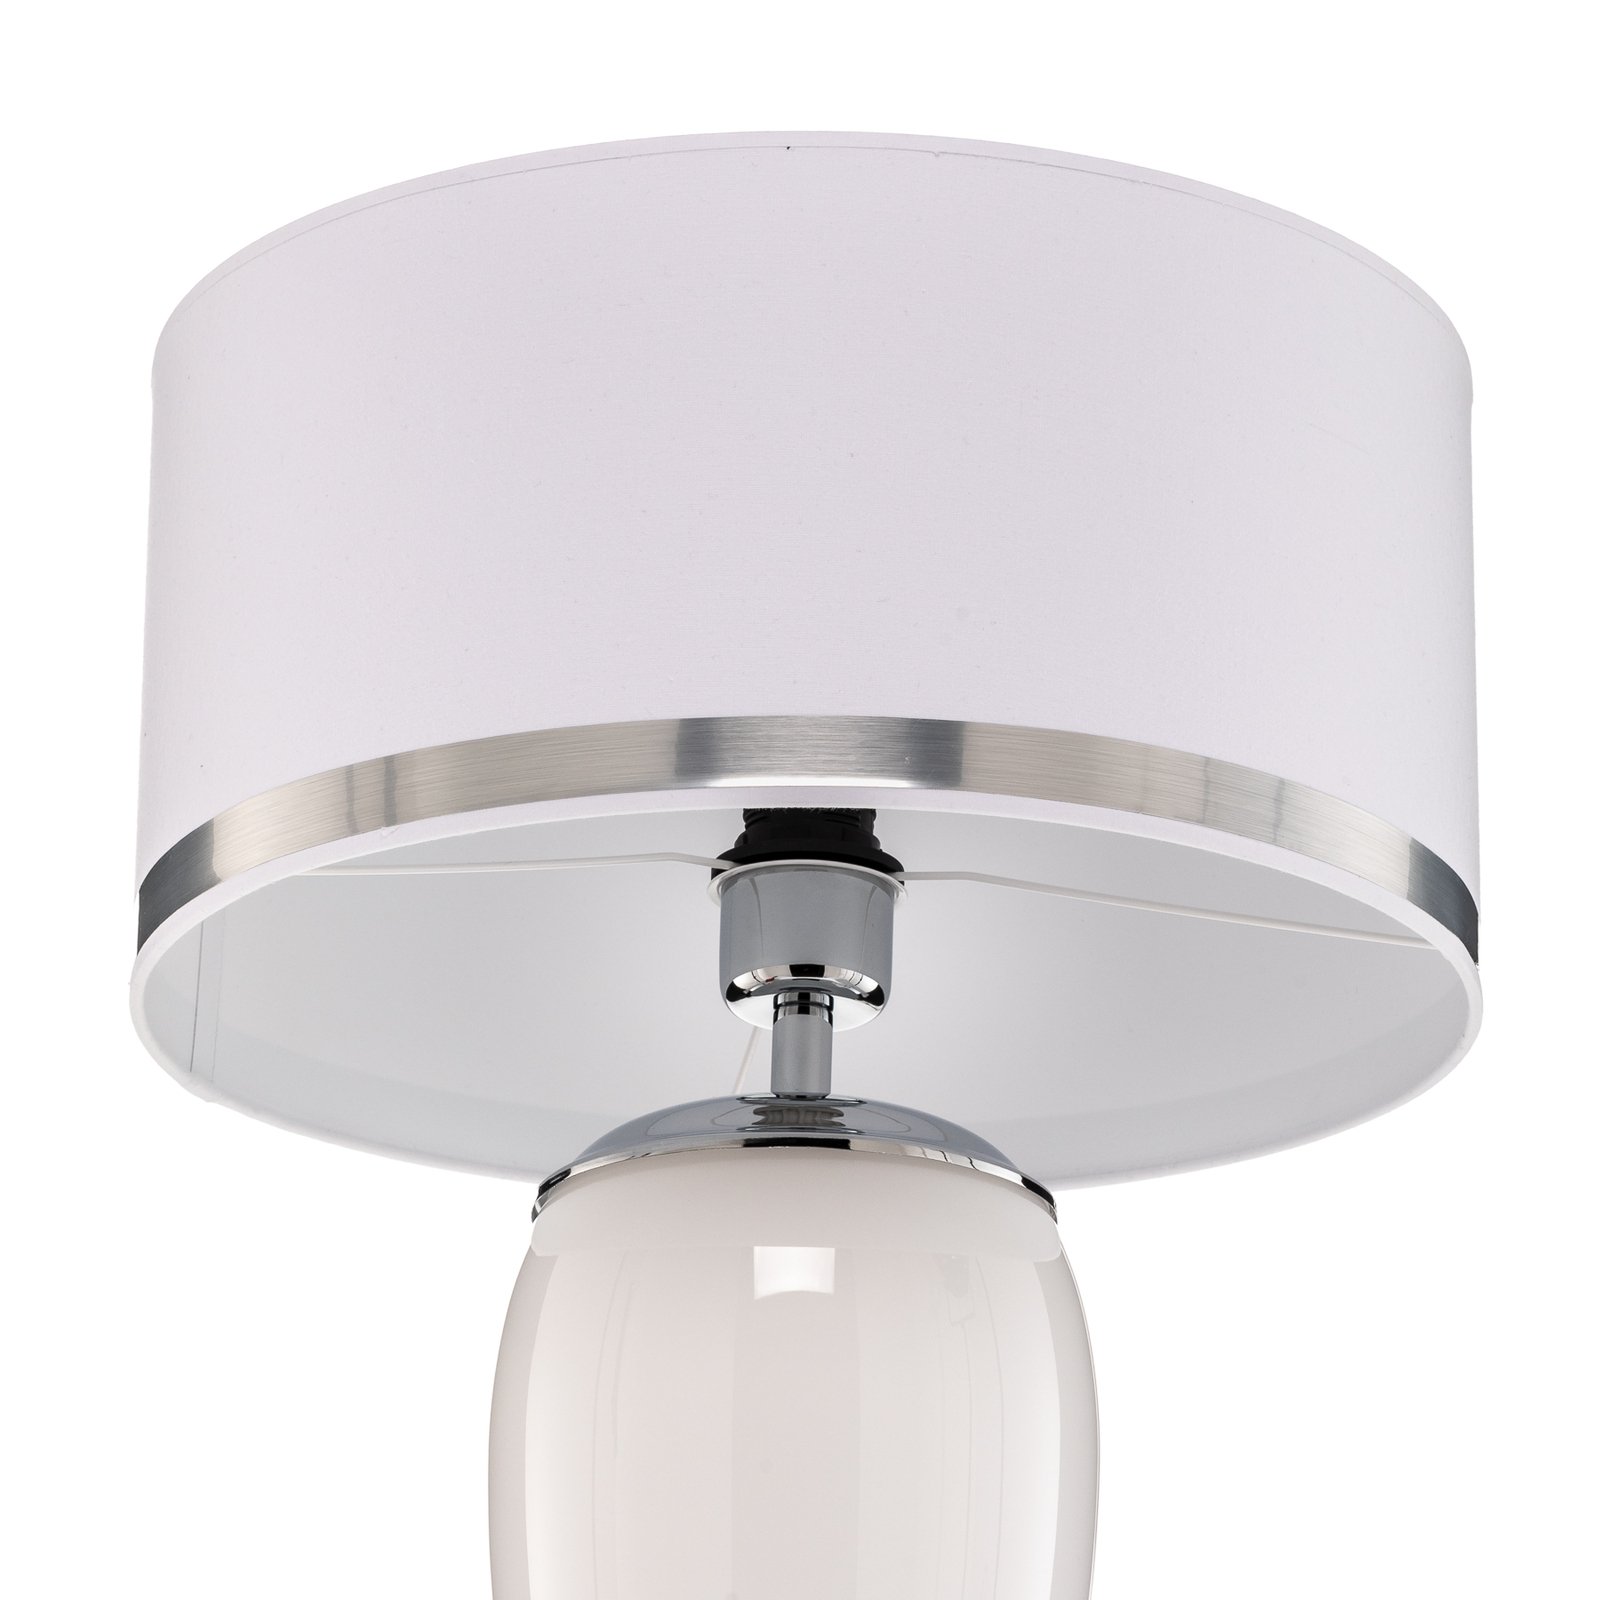 Lund table lamp, white/opal, height 70 cm